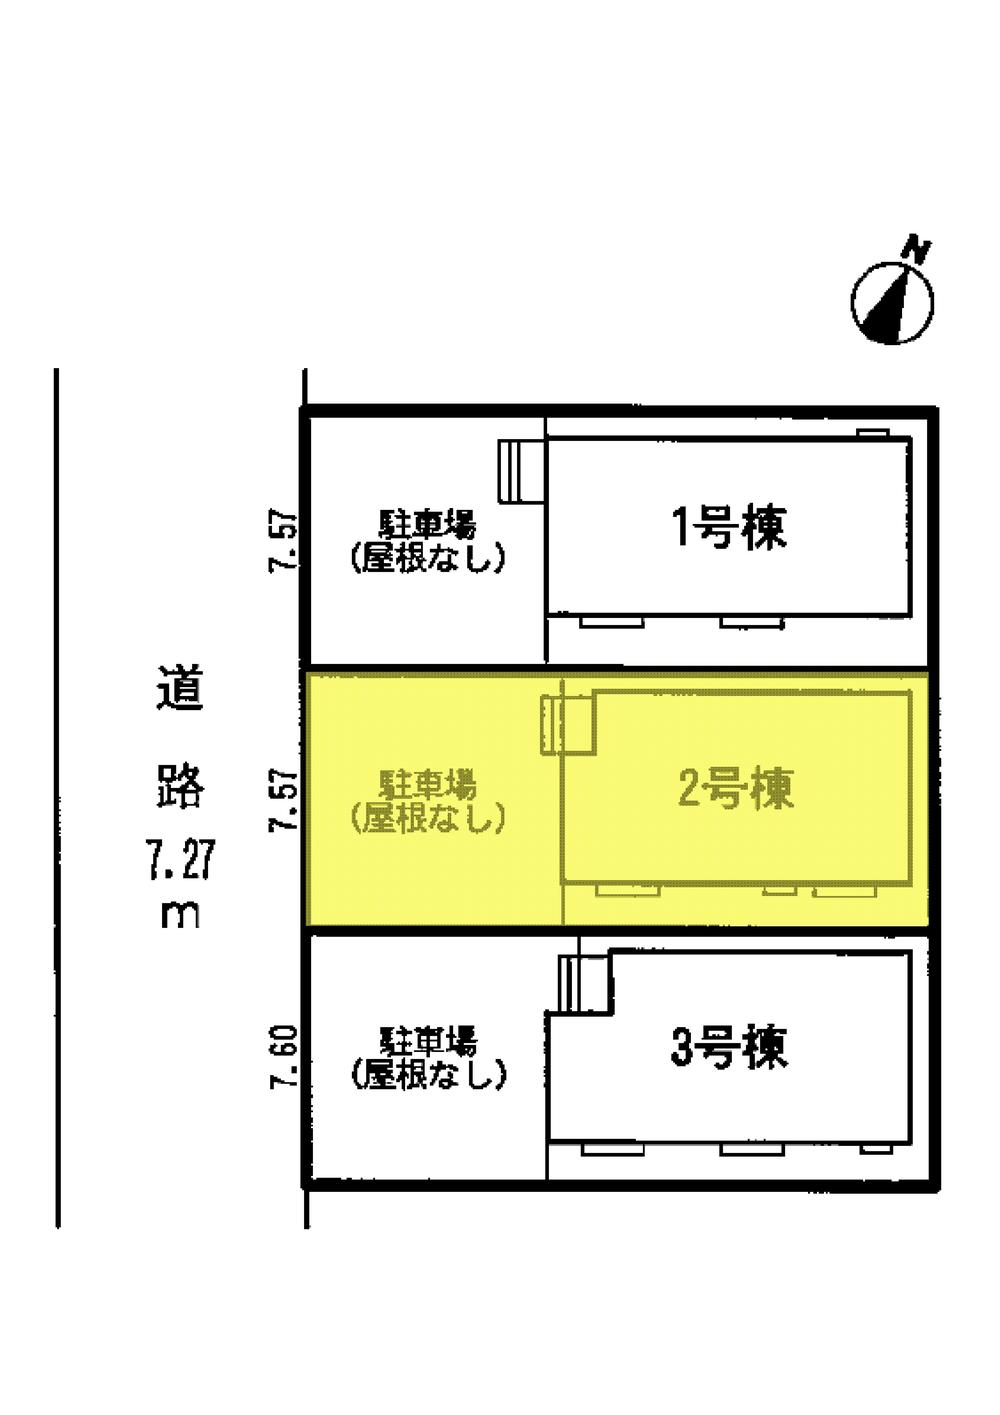 The entire compartment Figure. Yellow part is the Building 2. 